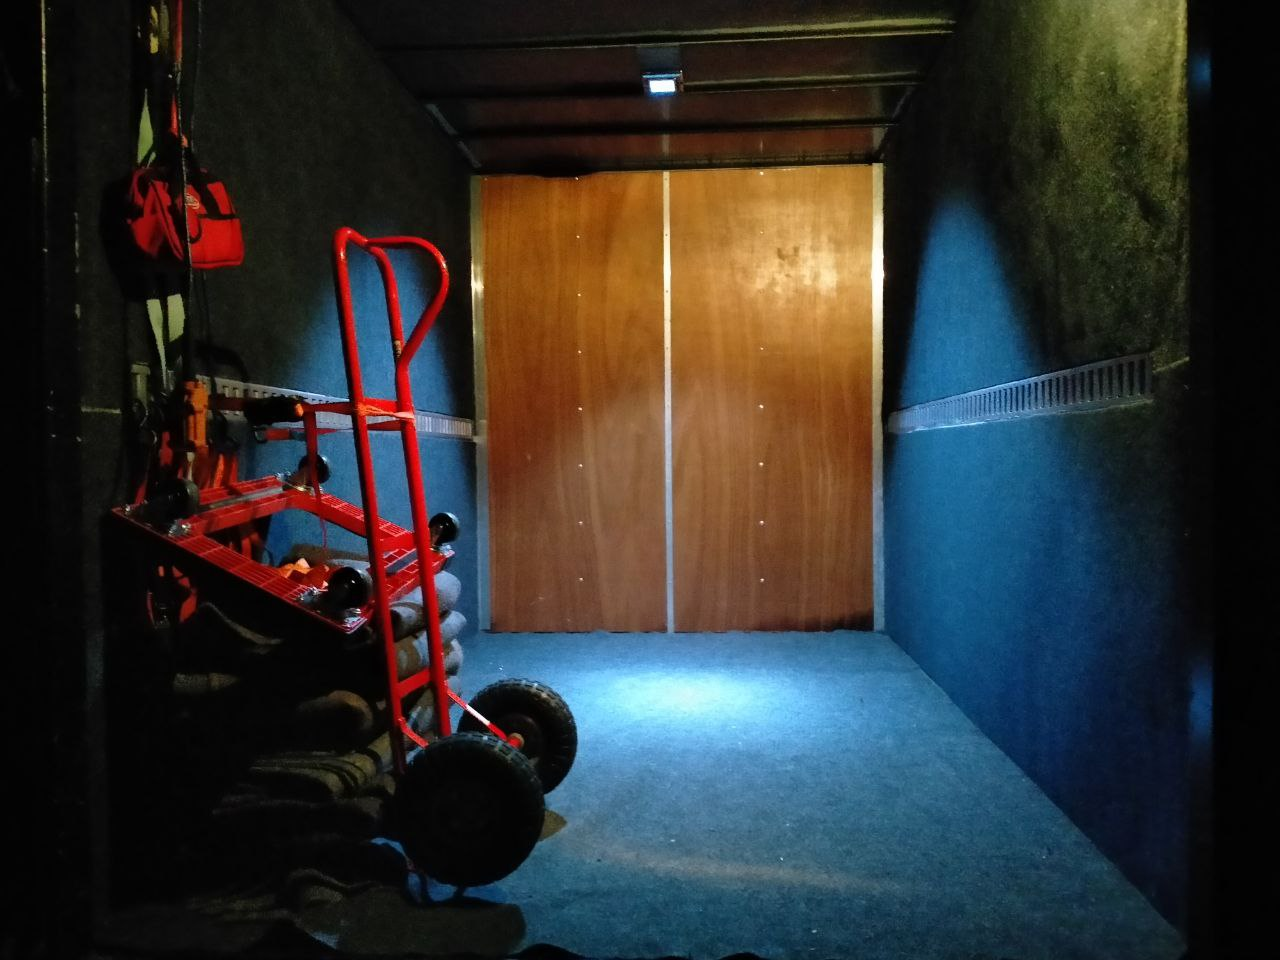 Inside view of a clean and tidy moving truck at night with down lighting inside lighting up the interior